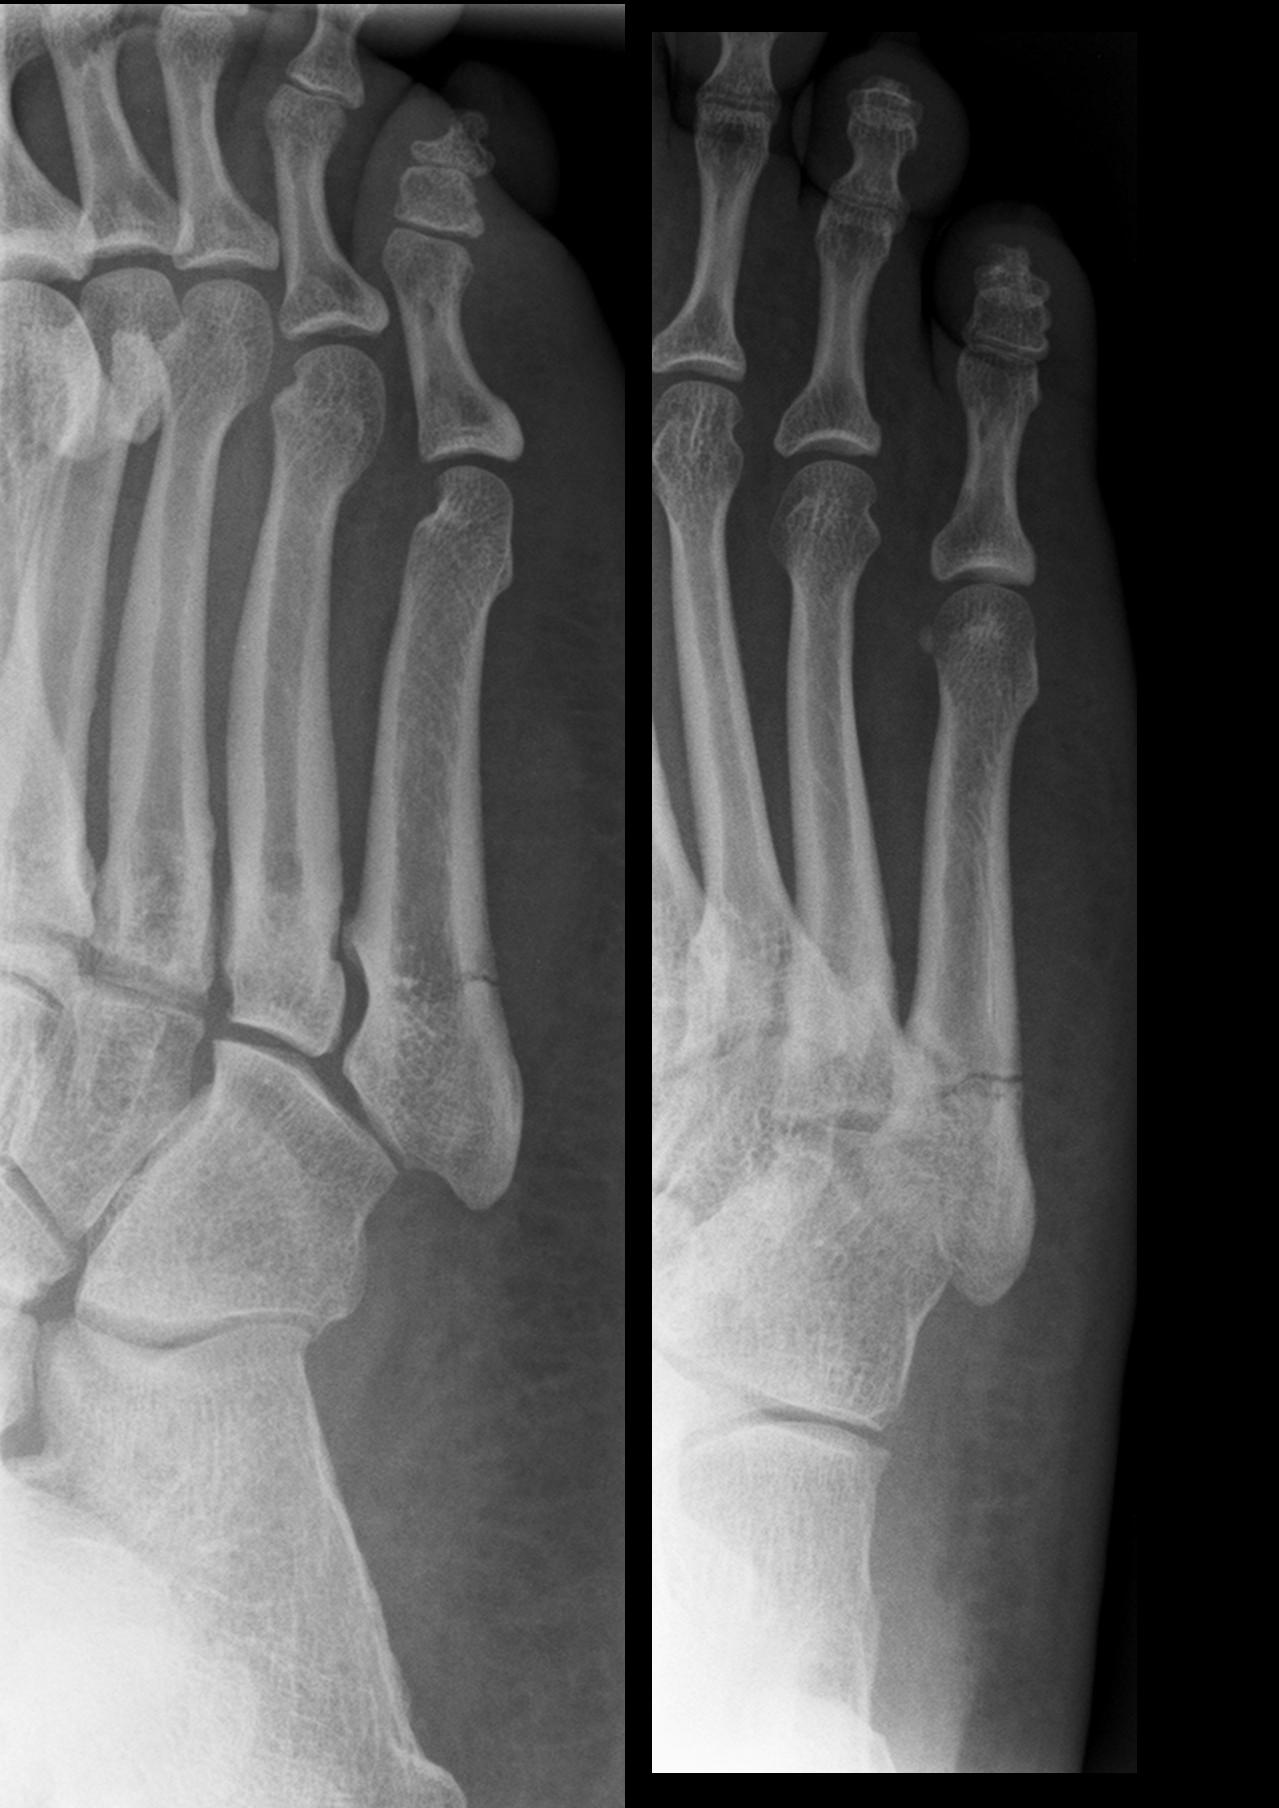 Jones Fracture And Physical Therapy Ace Physical Therapy And Sports Medicine Institute